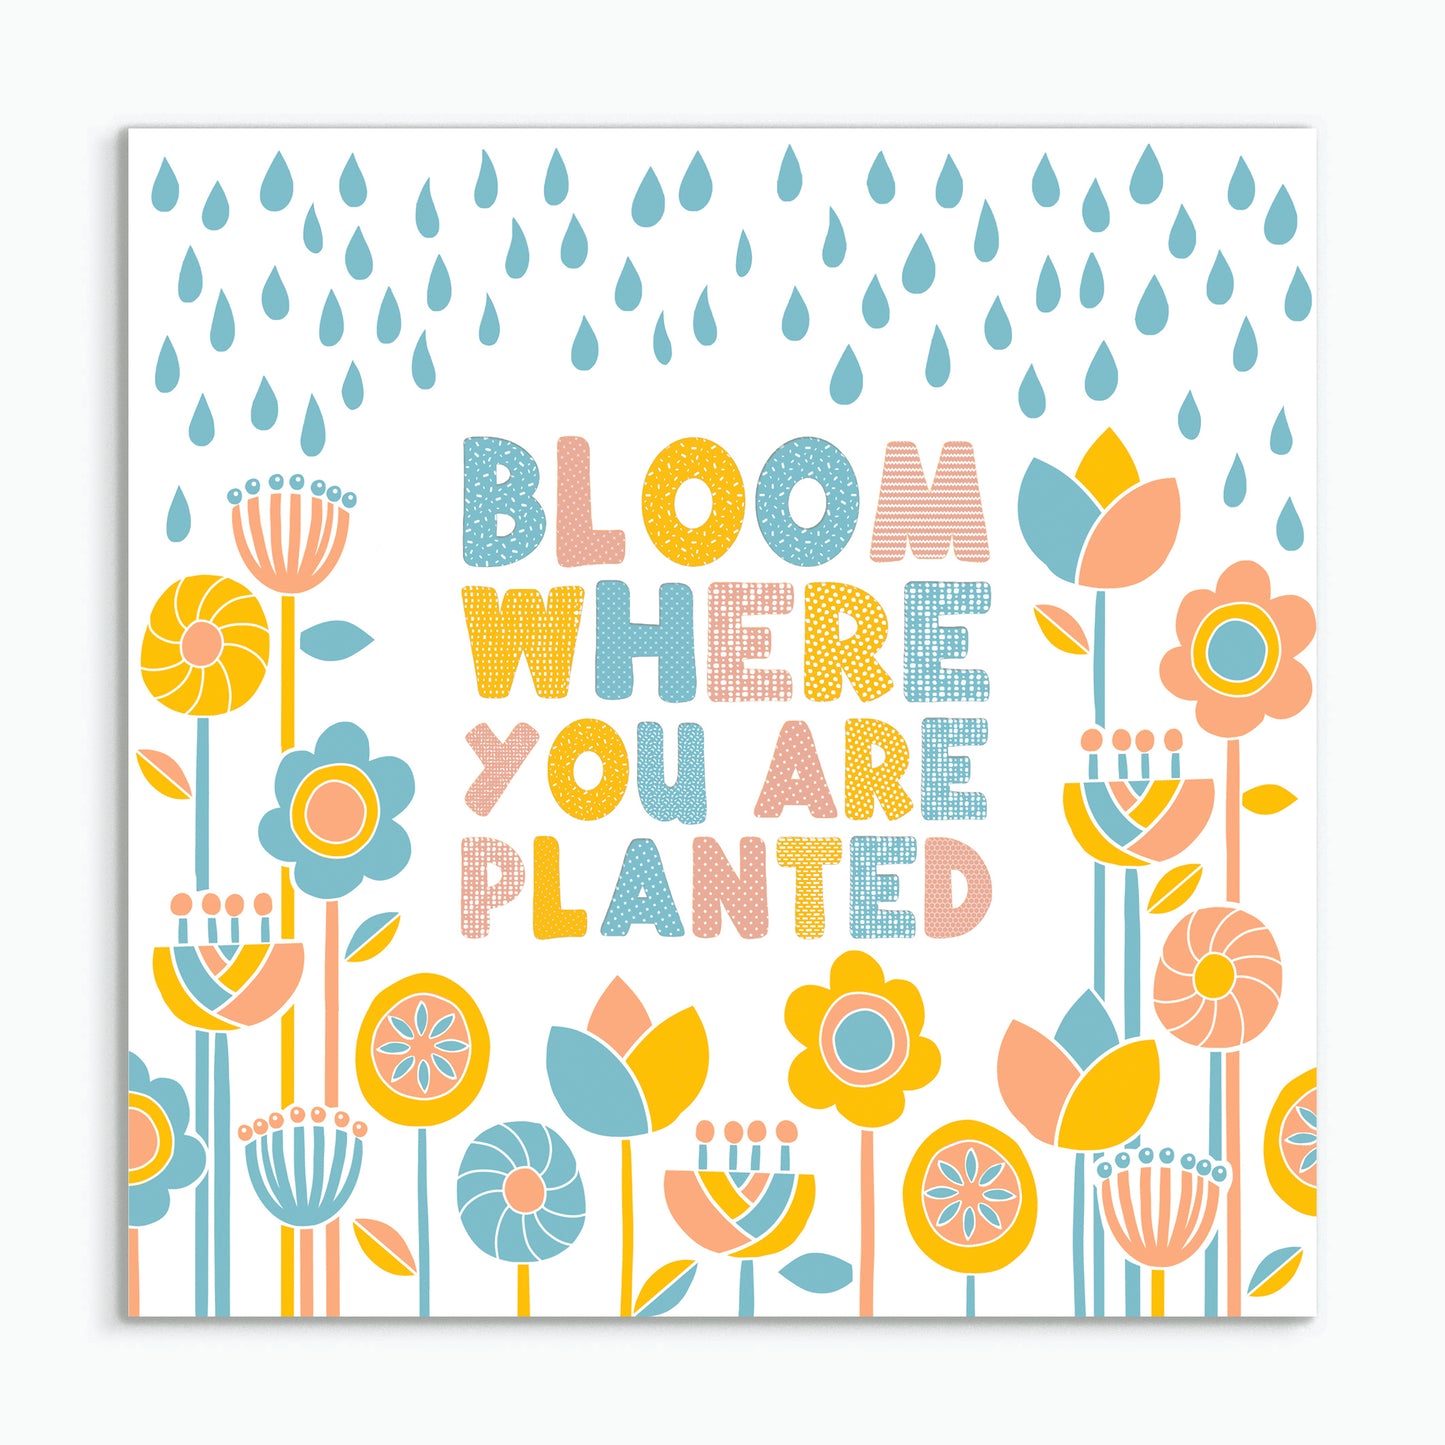 'Bloom where you are planted' square greeting card